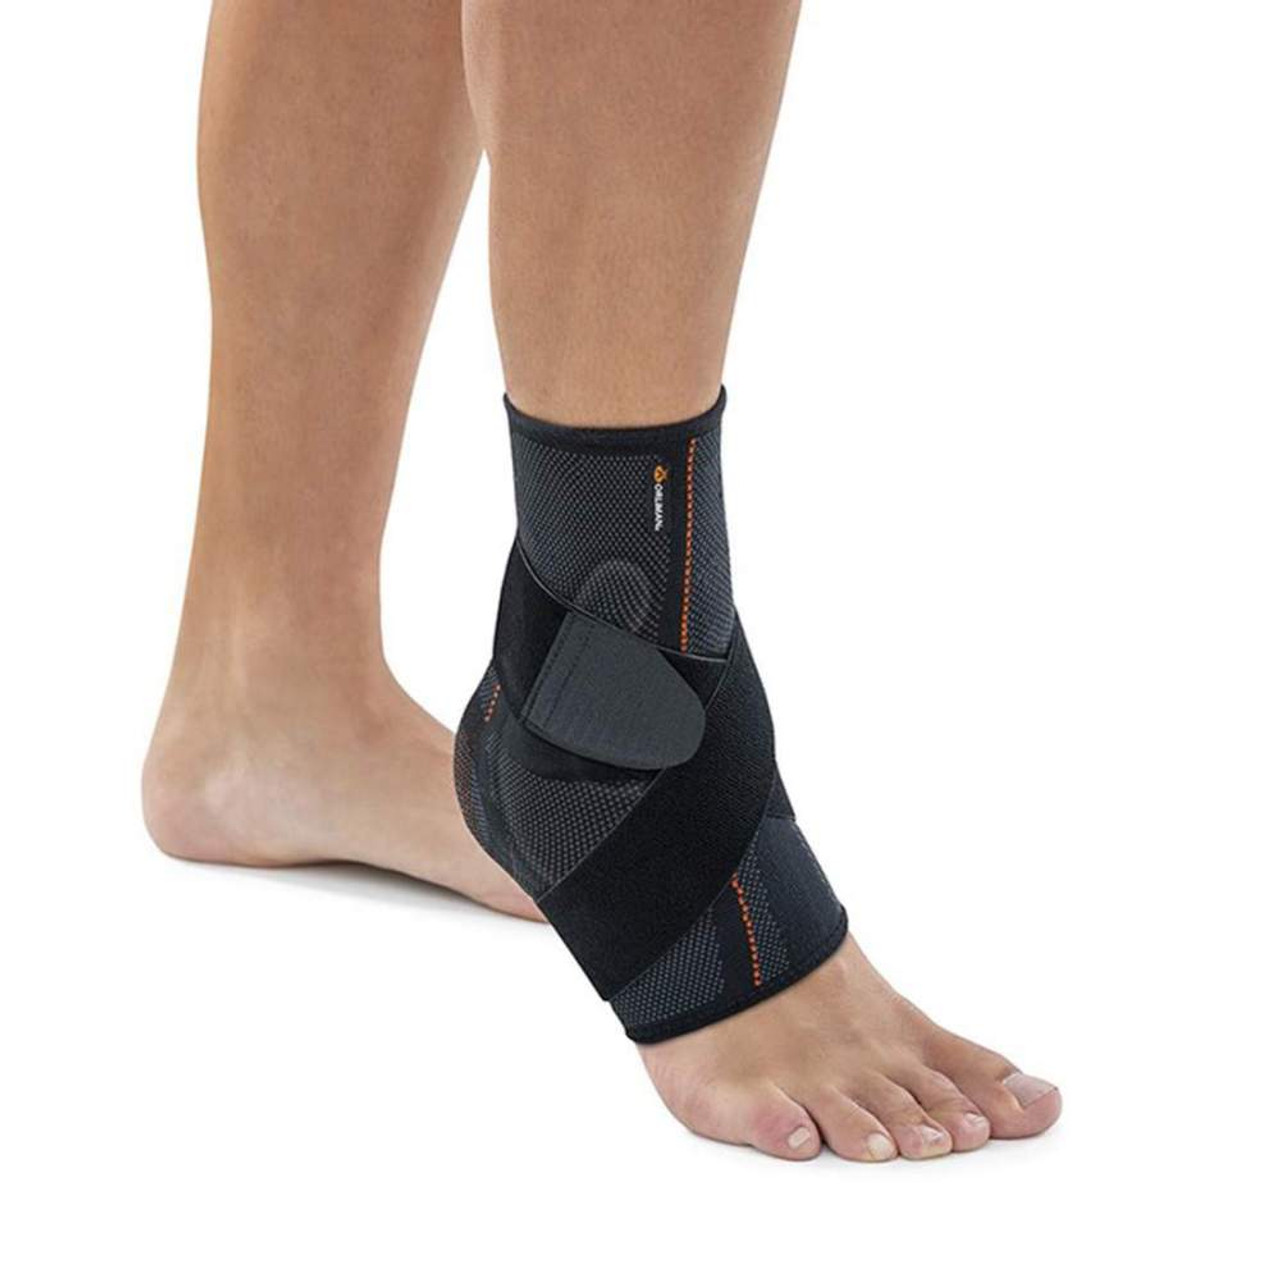 FUNCTIONAL ELASTIC ANKLE SUPPORT - XS/1, TGO490-XS